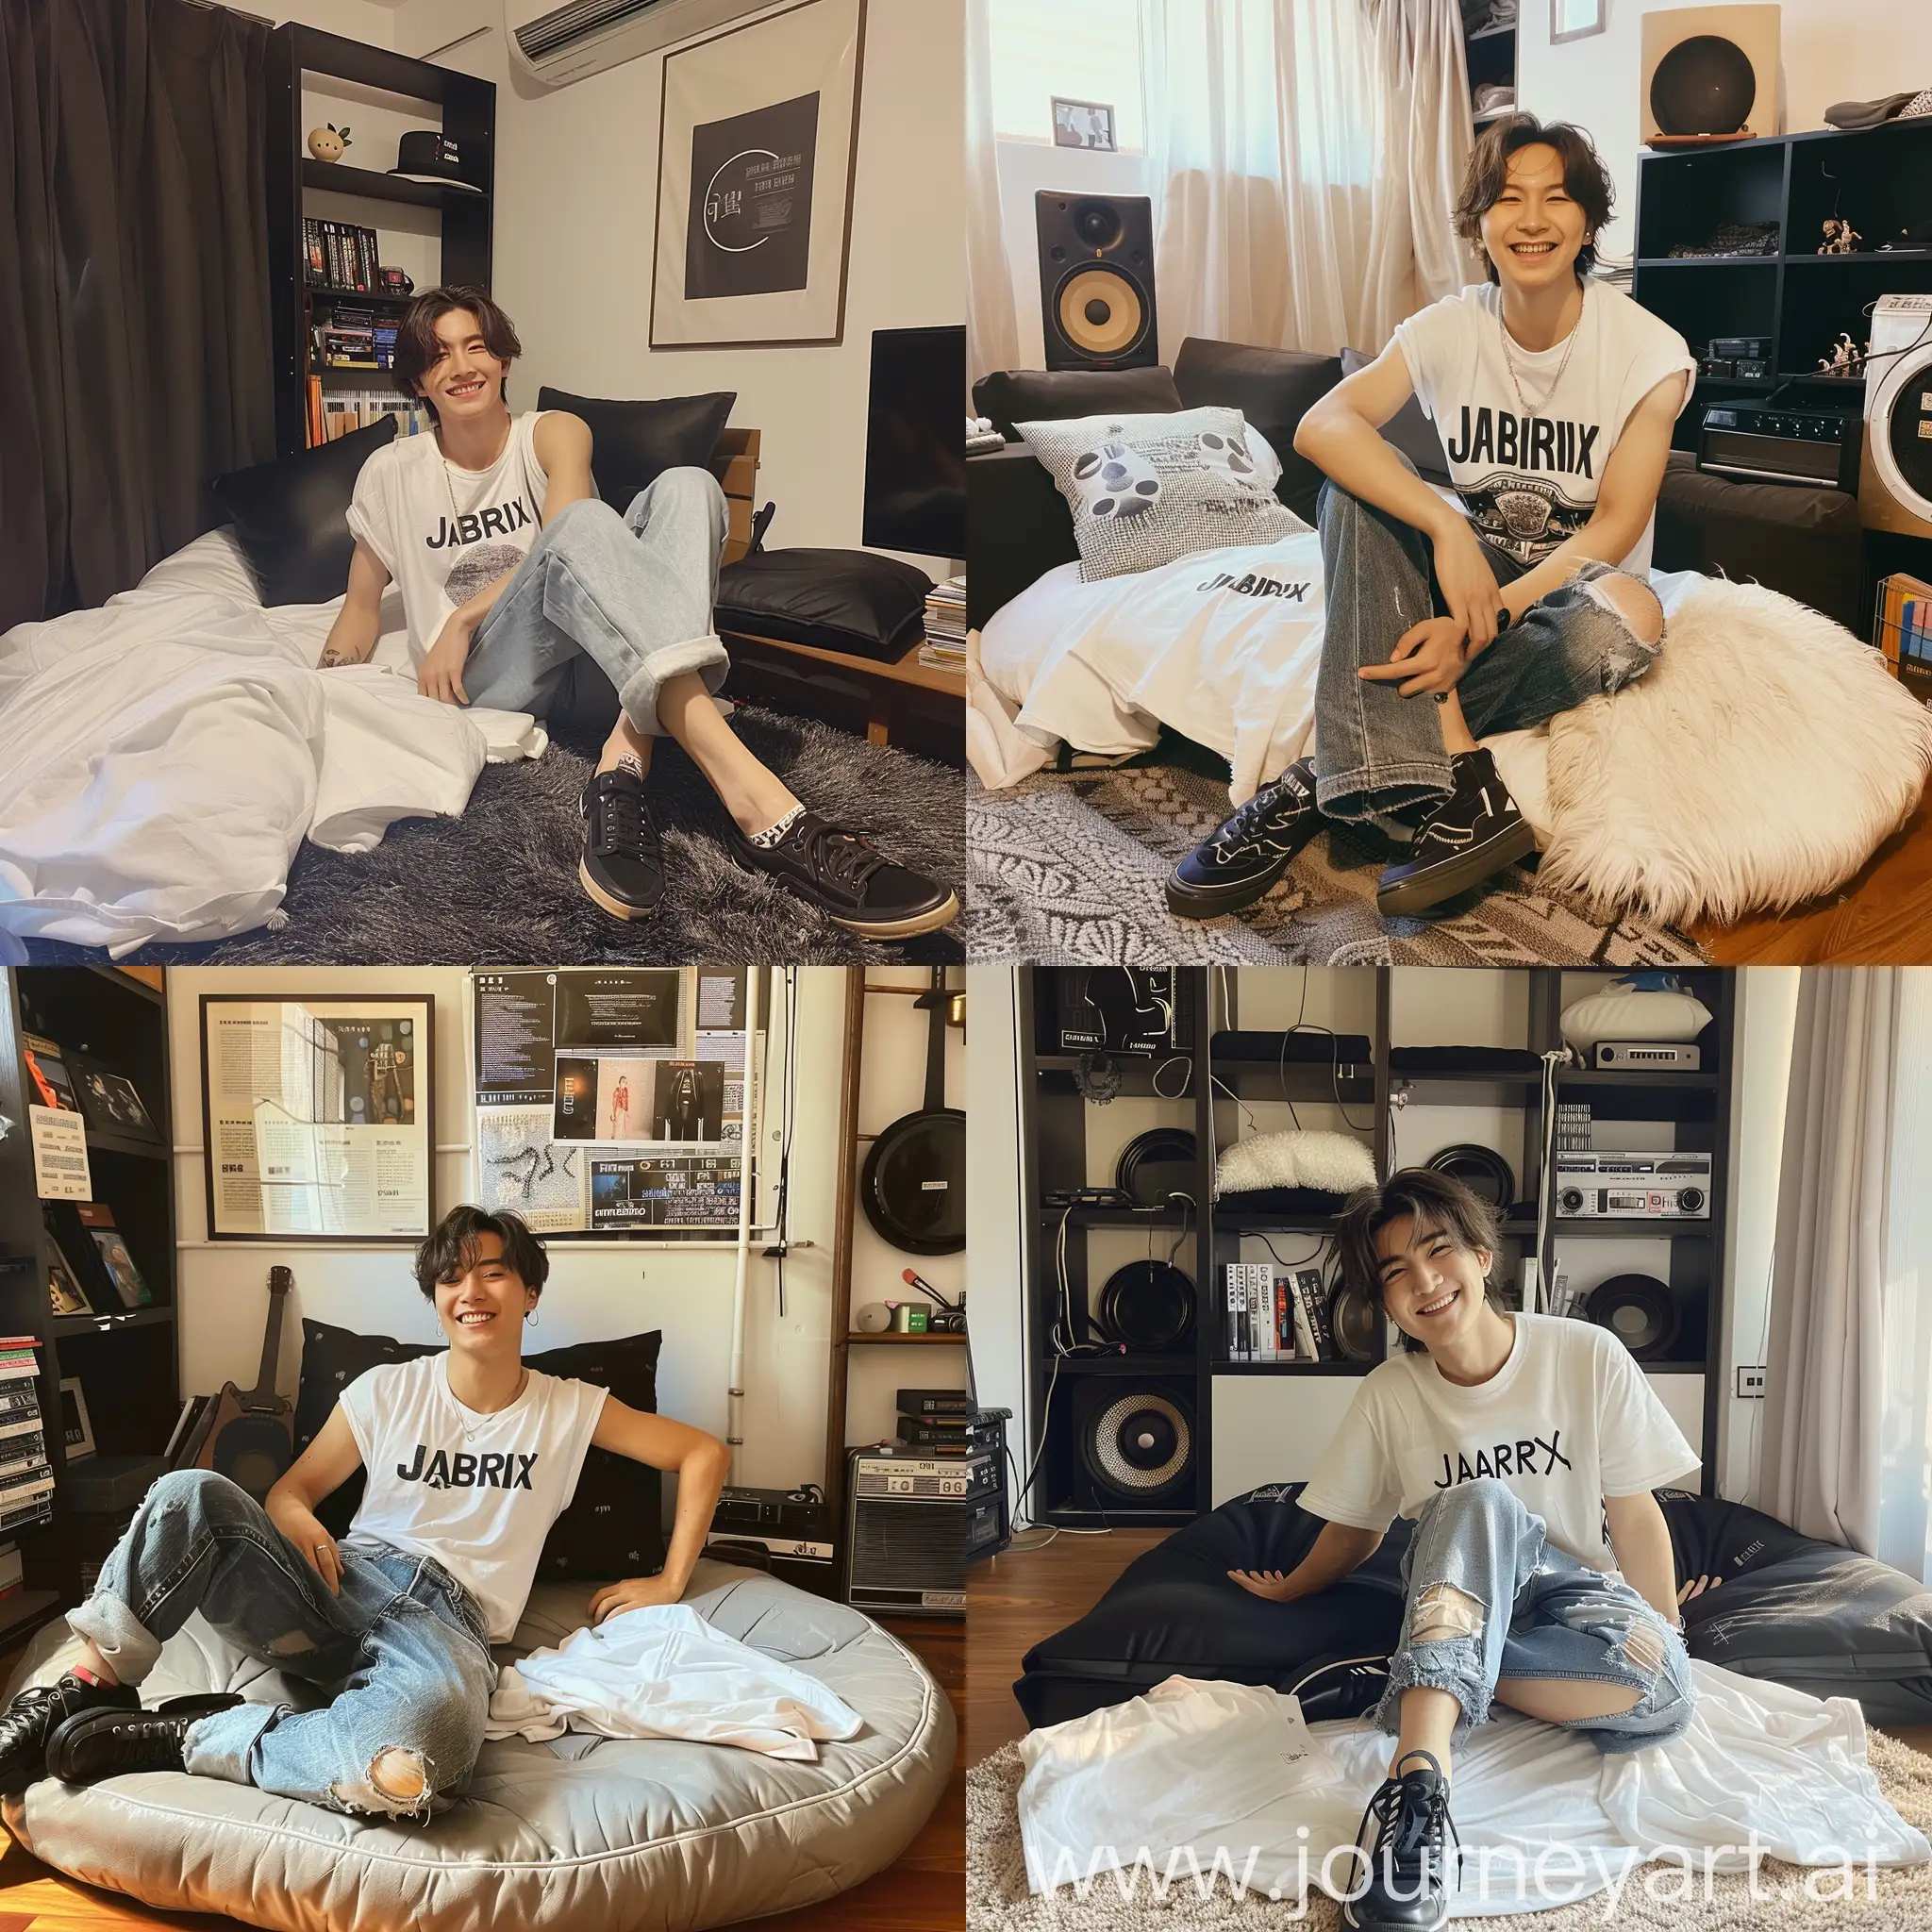 Funny-Taiwanese-Pop-Idol-in-Casual-Wear-Smiling-in-Bedroom-Setting